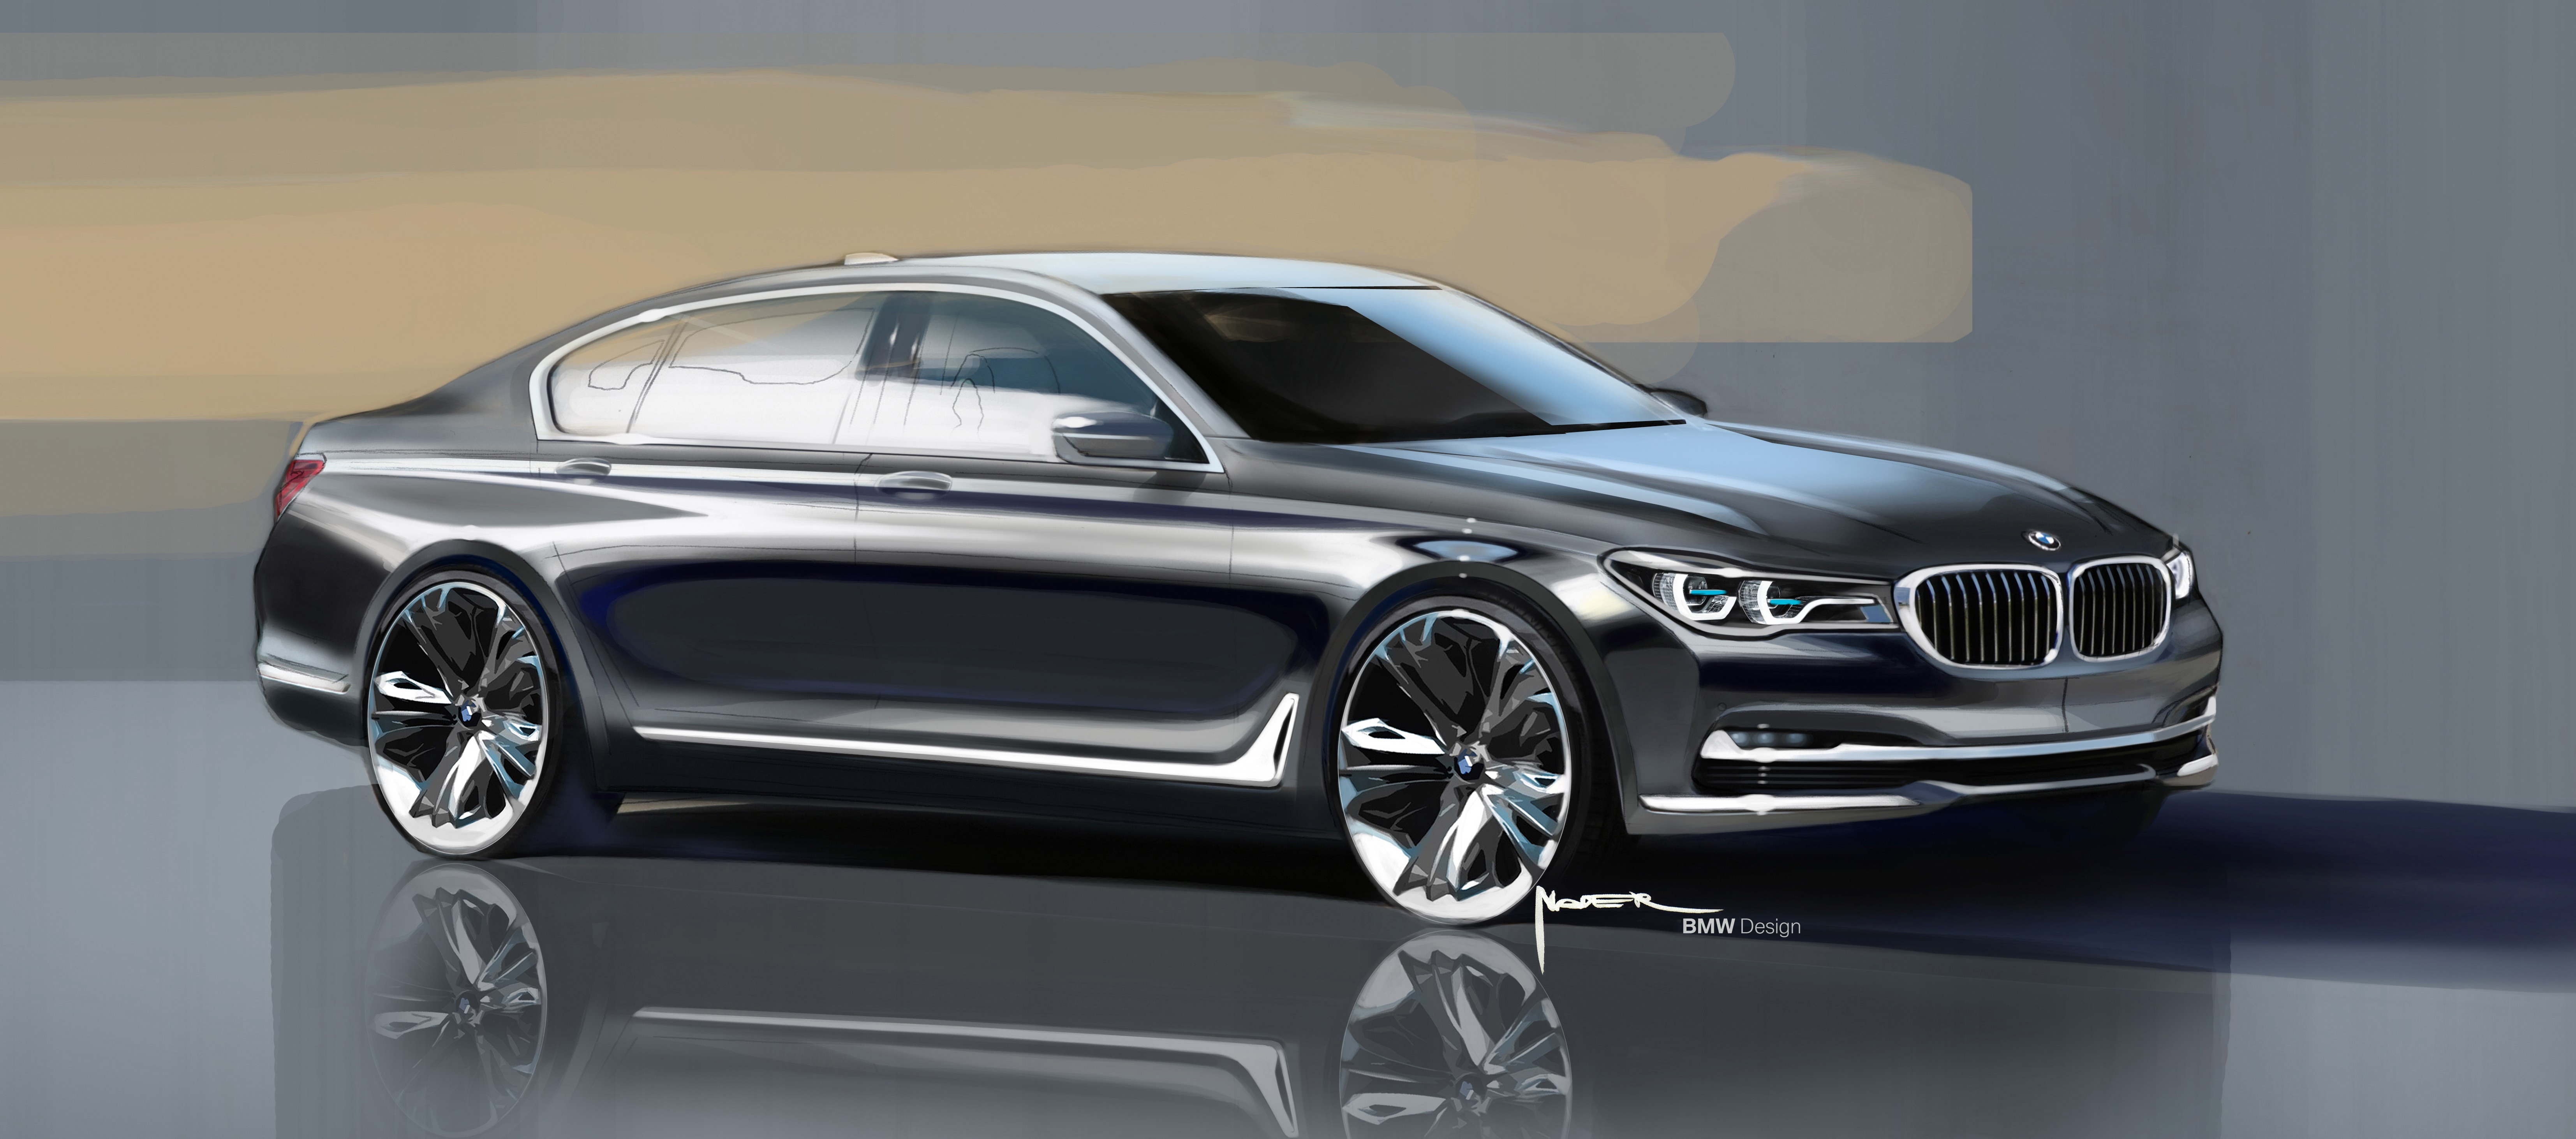 2016 BMW 7 Series Wallpapers and Videos Want to Pull You Into a World ...